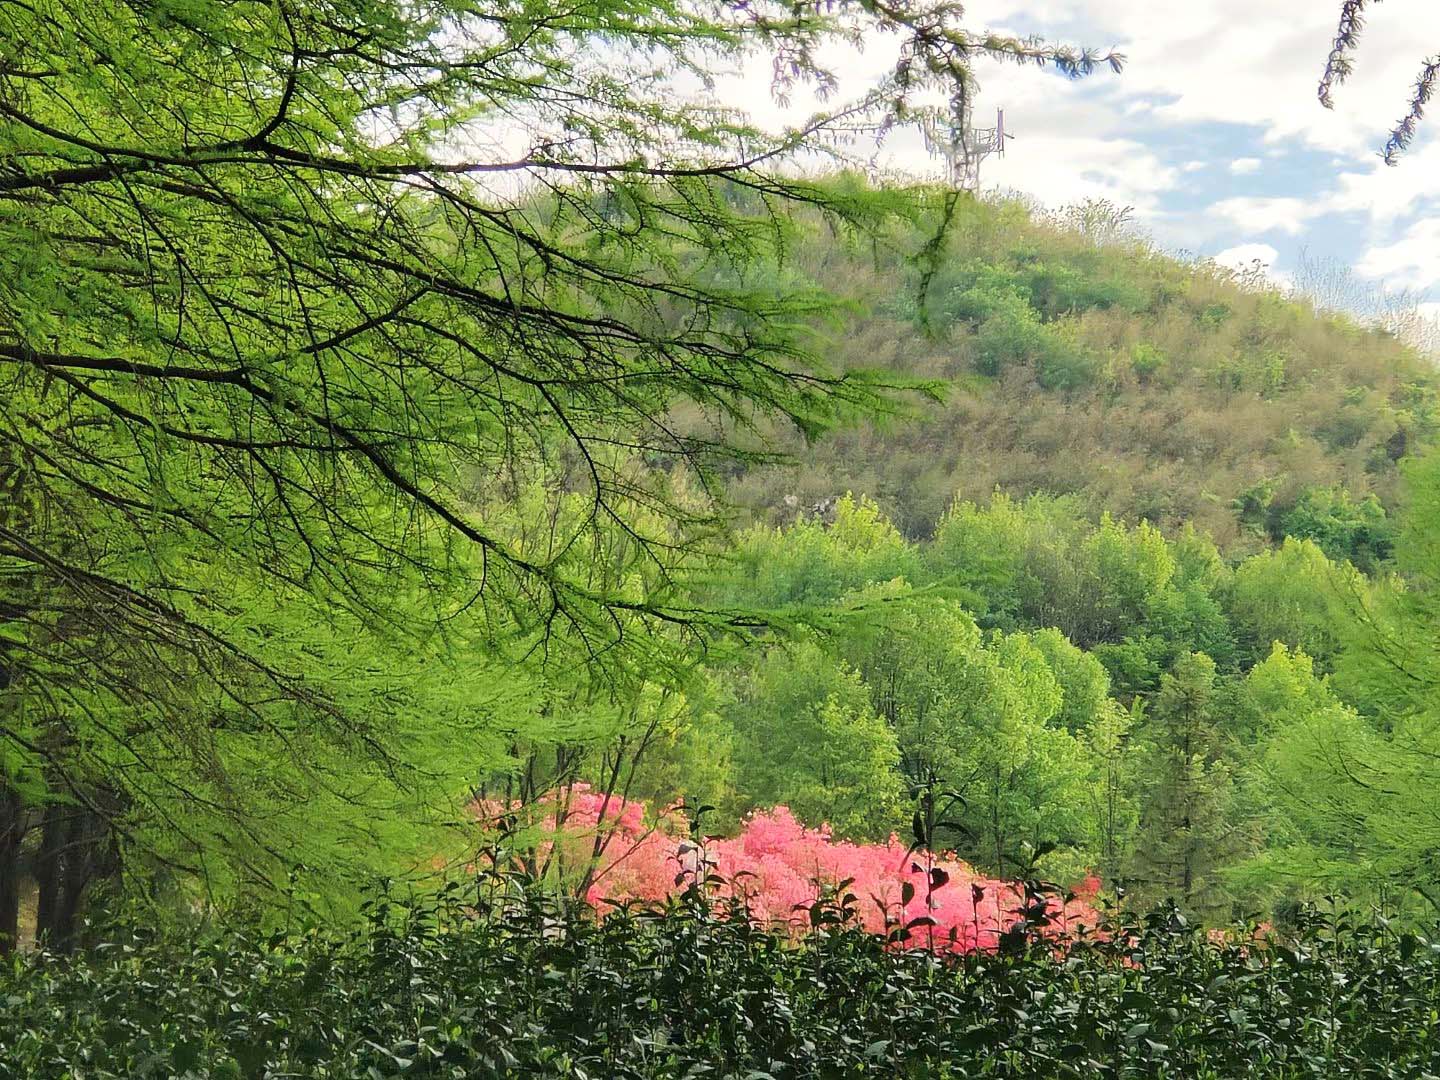 ea bushes with a bank of bright pink flowering trees in the middle and overhung by graceful cypress tree branches, all watched over by the rounded peak of Moganshan rising in the background.